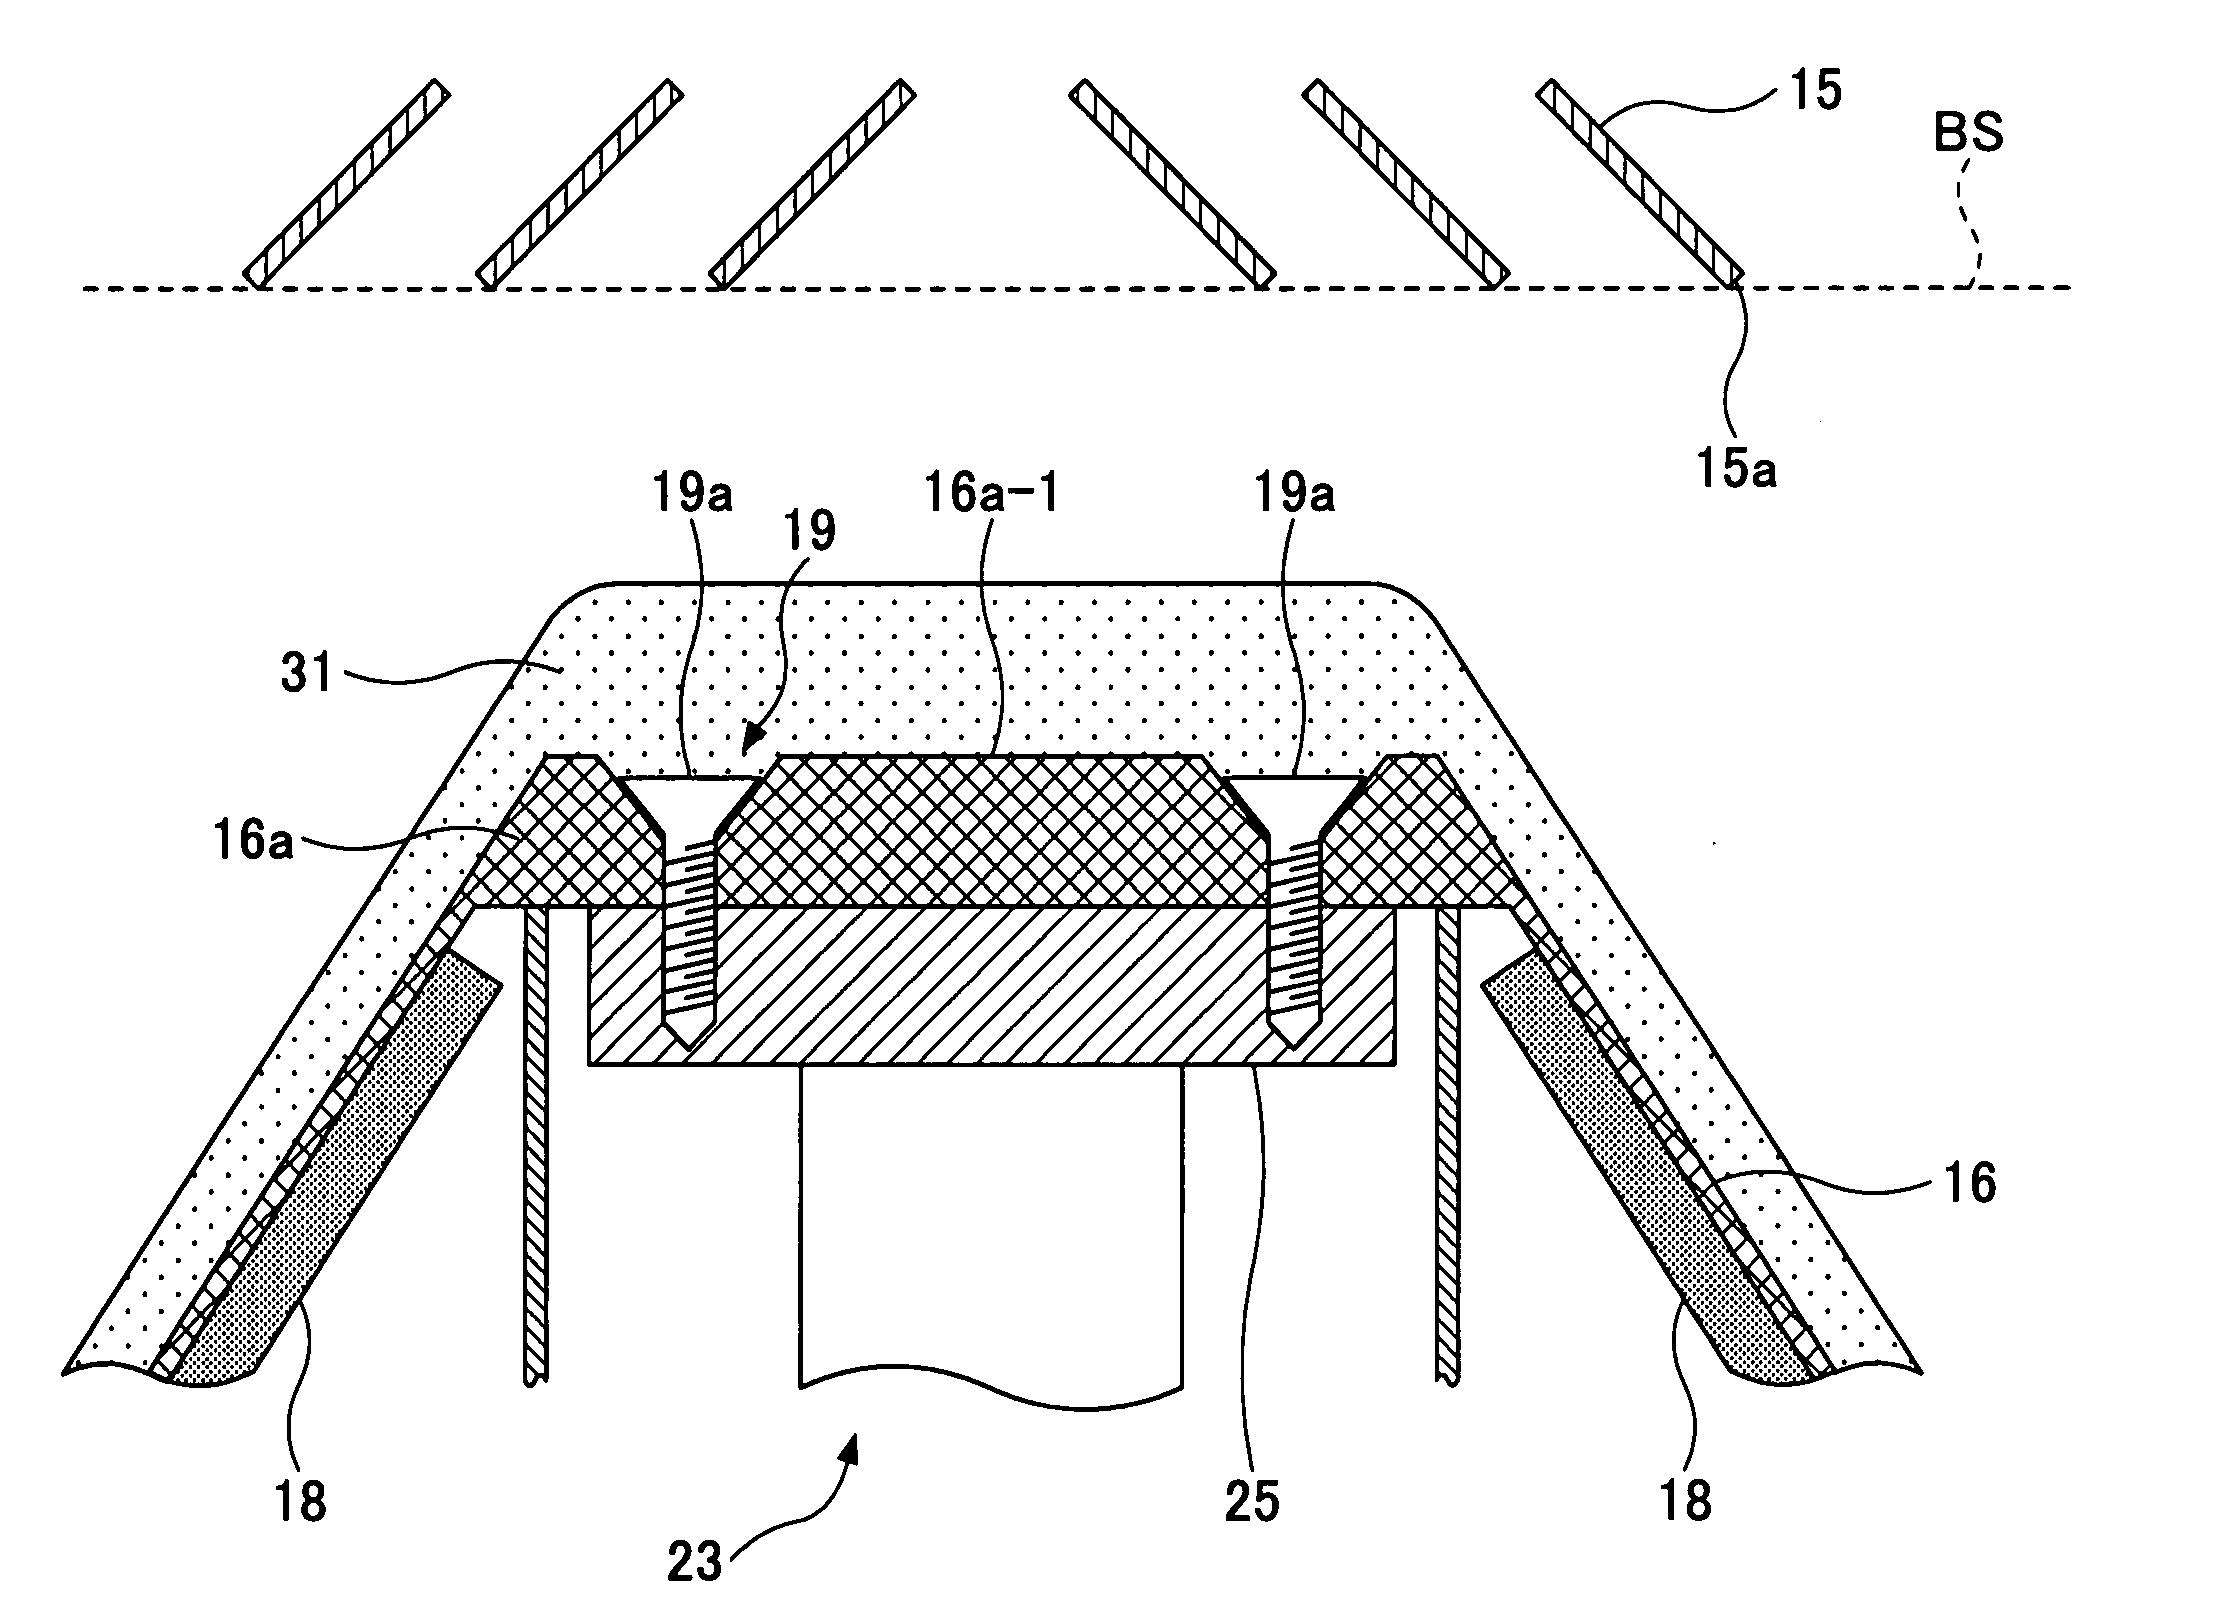 Cryopump and semiconductor device manufacturing apparatus using the cryopump